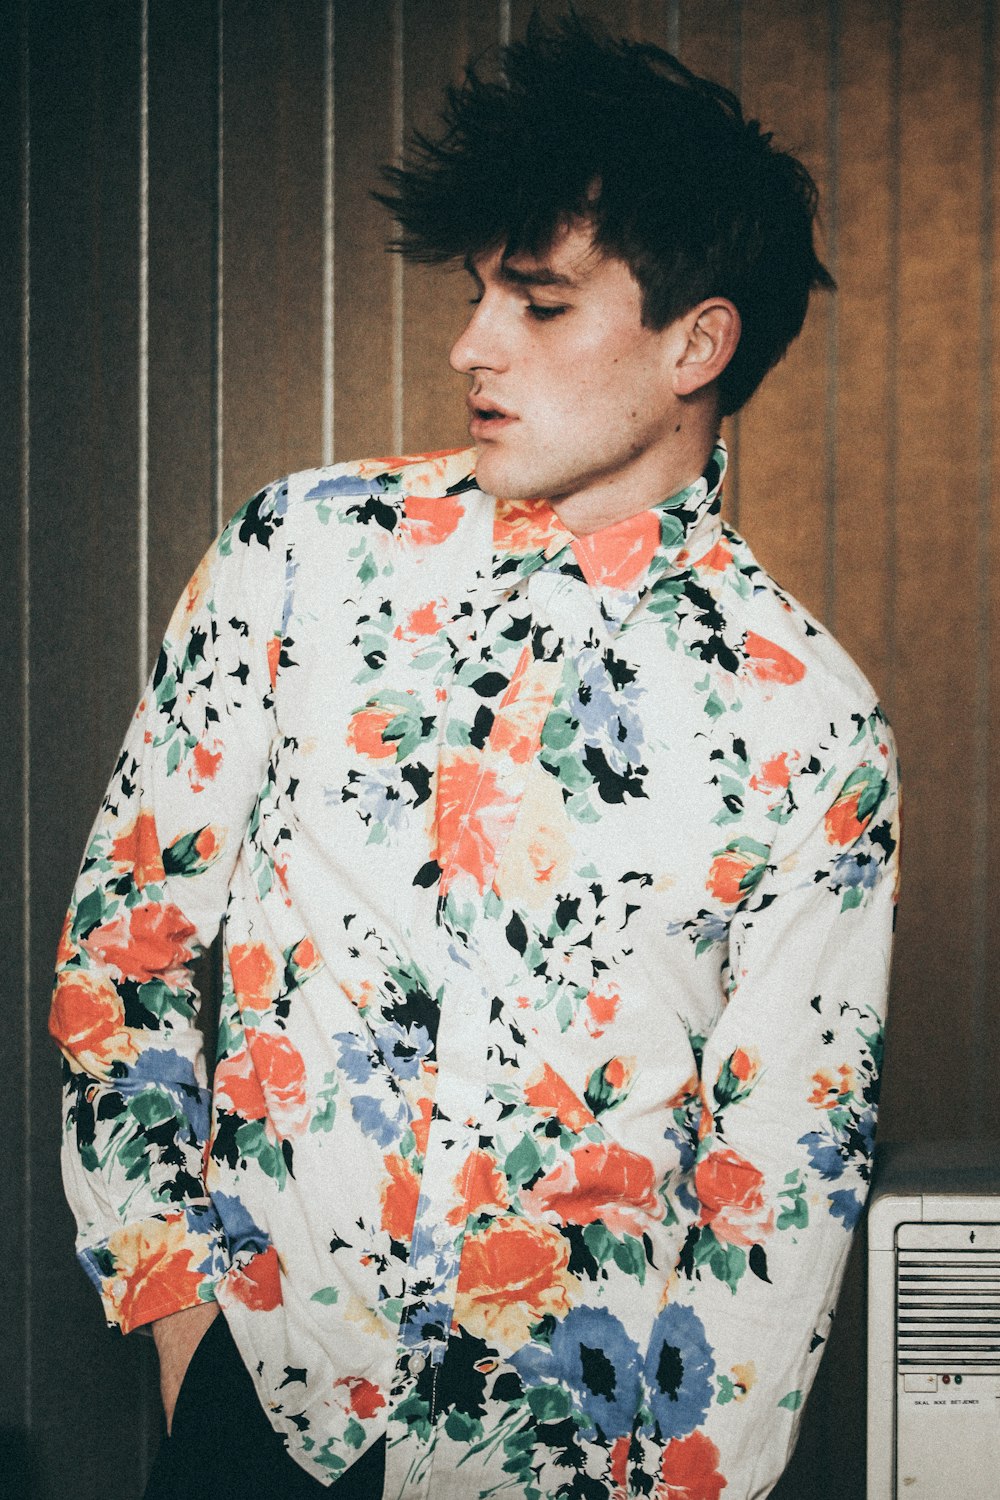 multicolored floral dress shirt